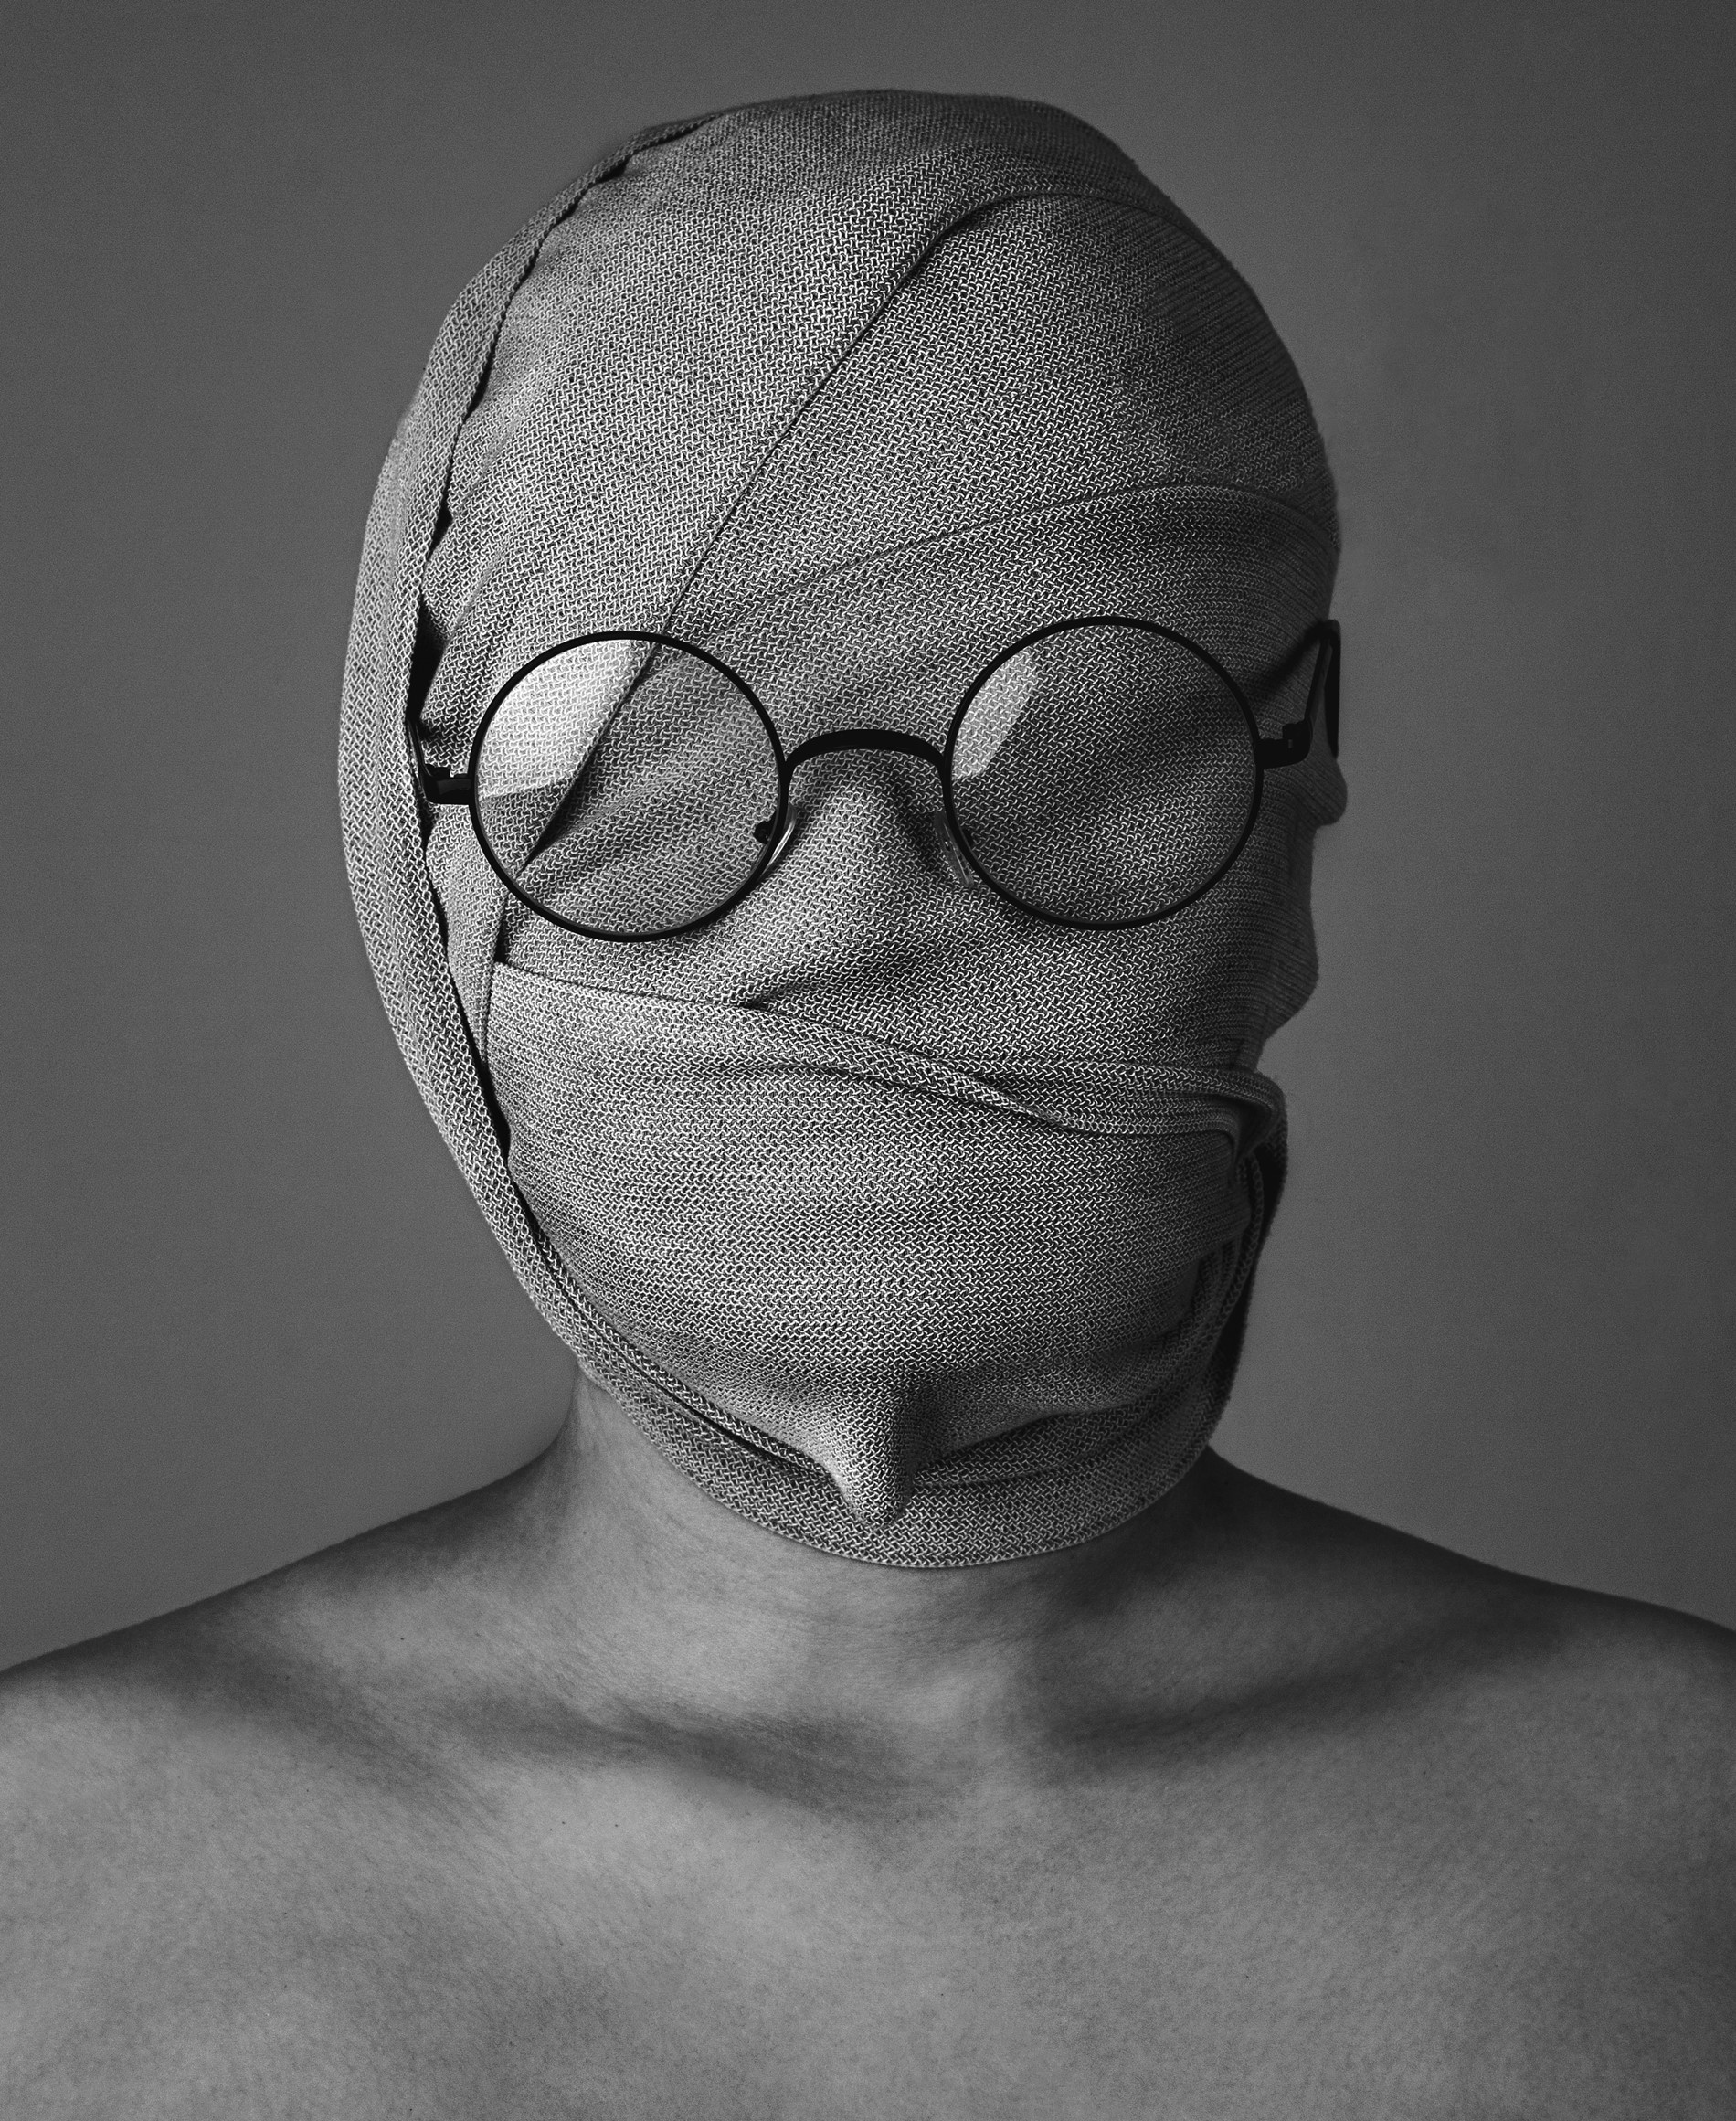 Bondage, person wearing a face mask